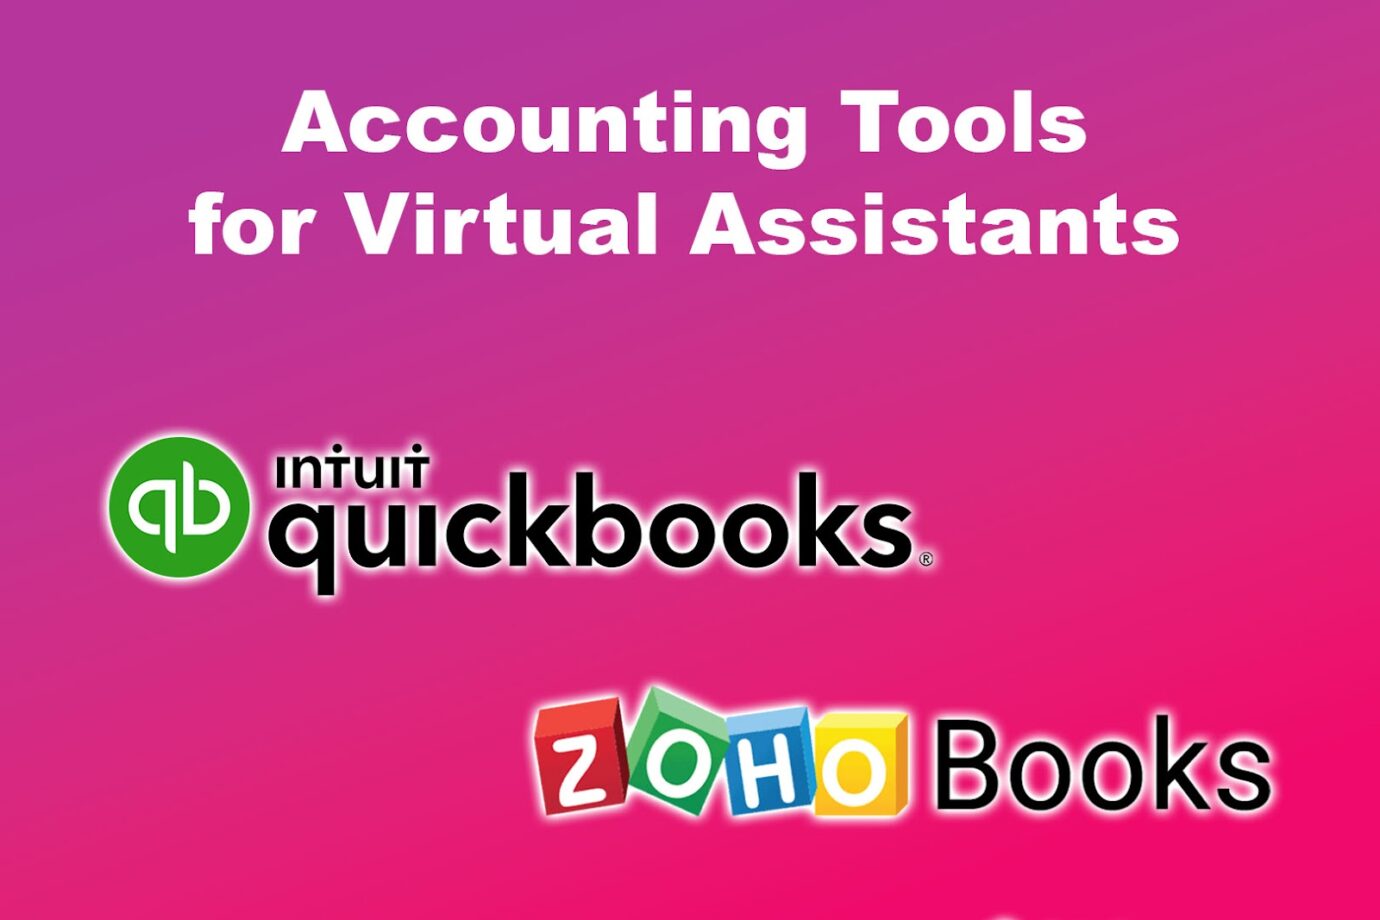 Accounting Tools for Virtual Assistants